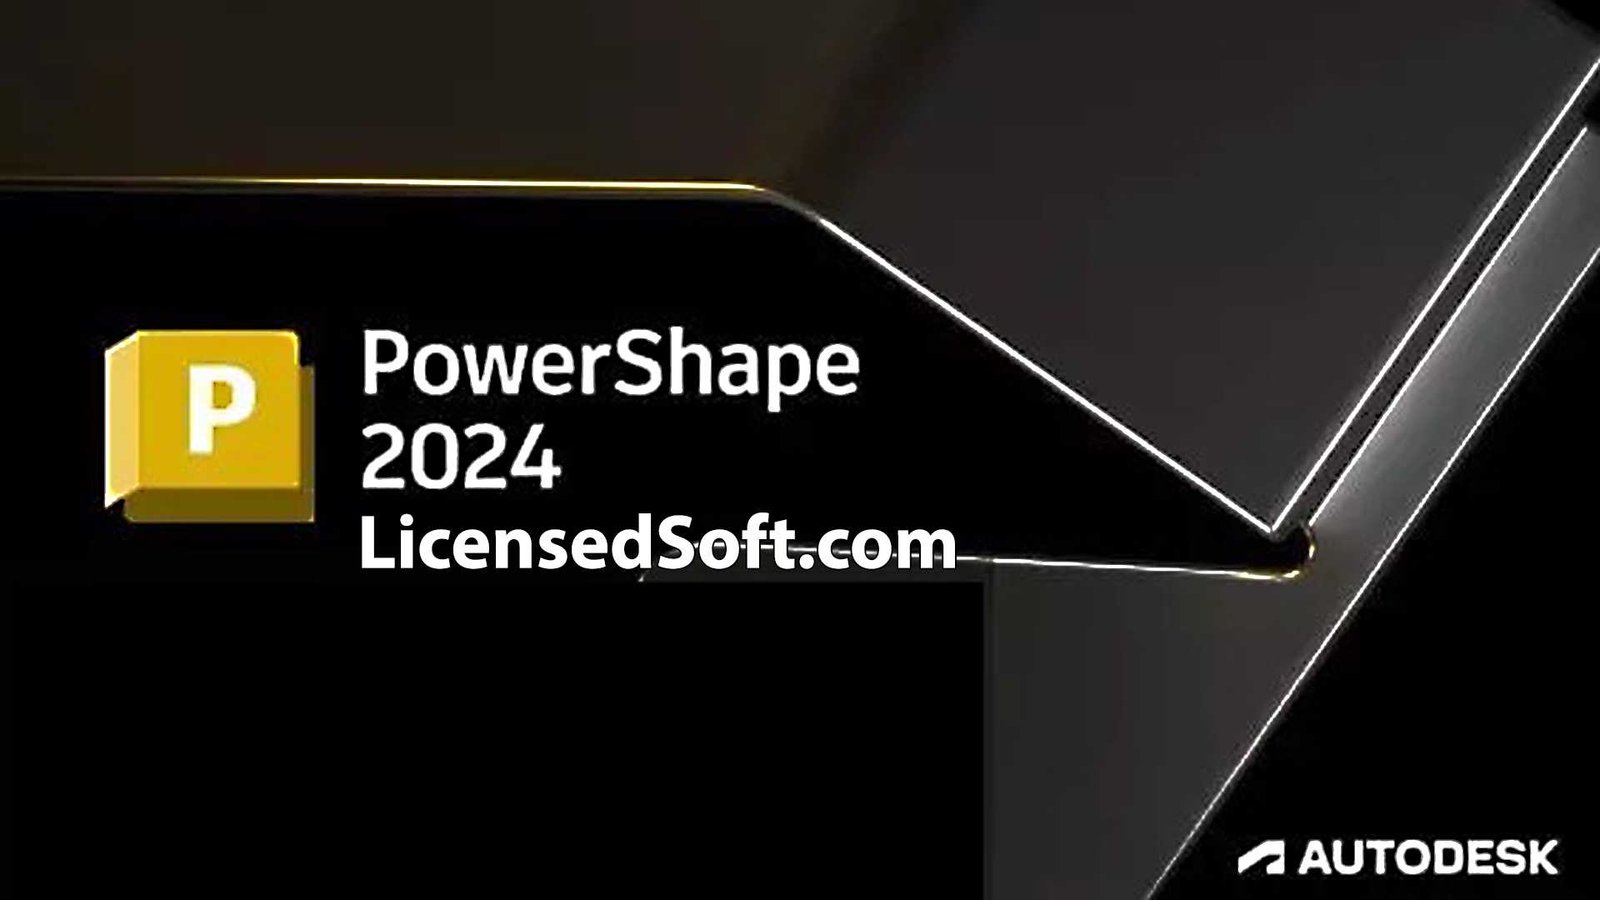 Autodesk PowerShape Ultimate 2024 Cover Image By LicensedSoft